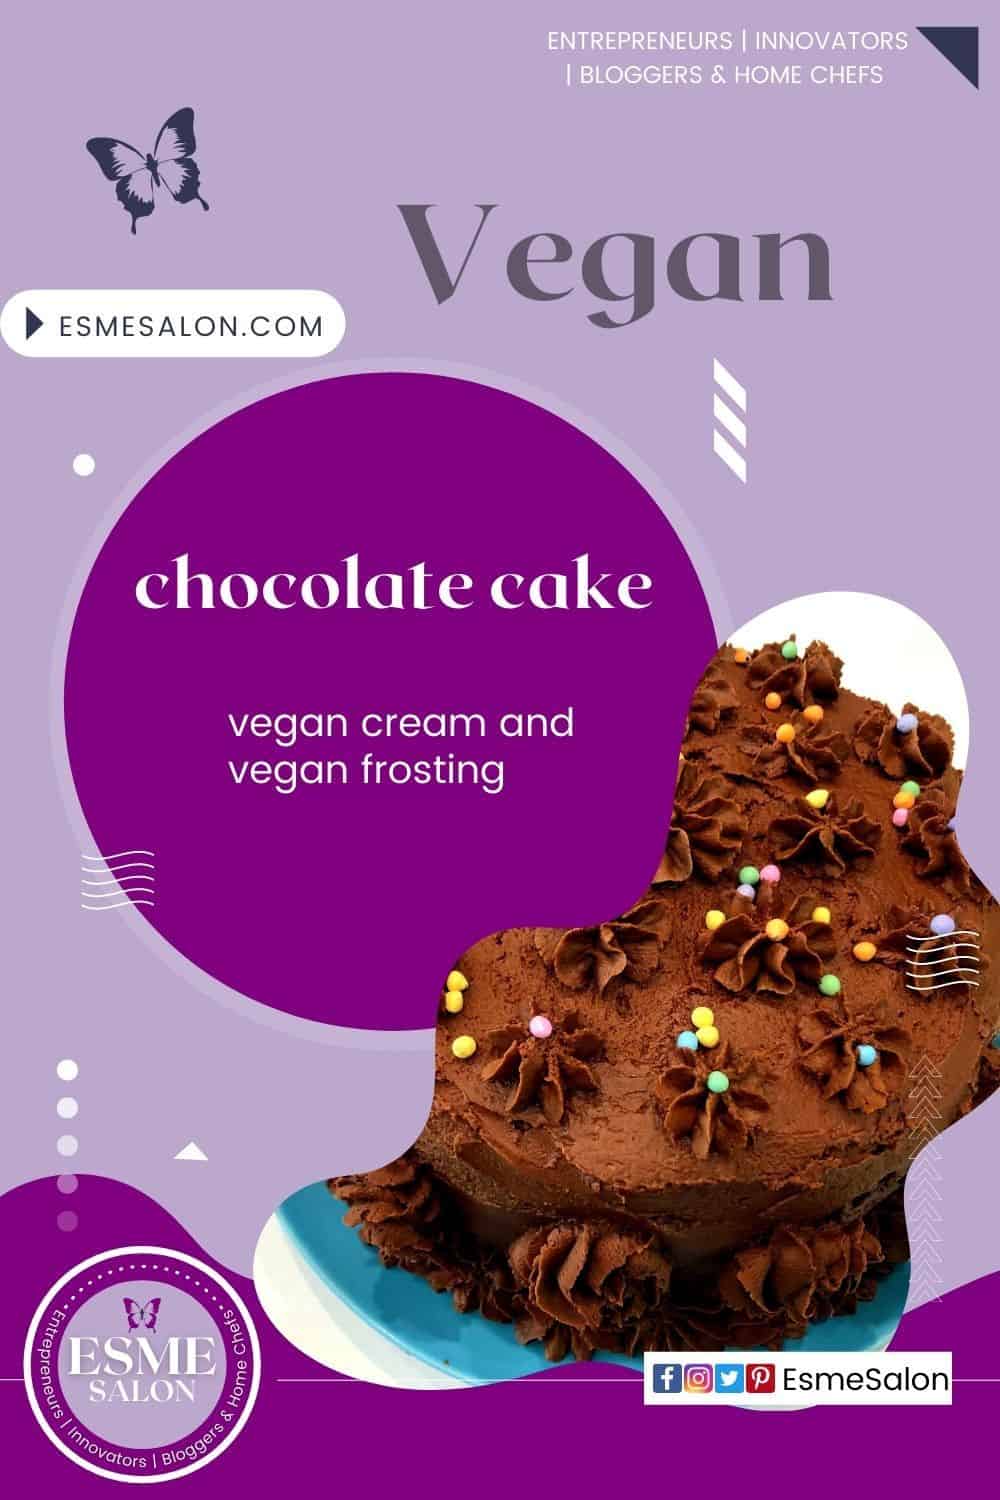 A Vegan Chocolate Cake with vegan cream and vegan chocolate topping with colored sprinkles